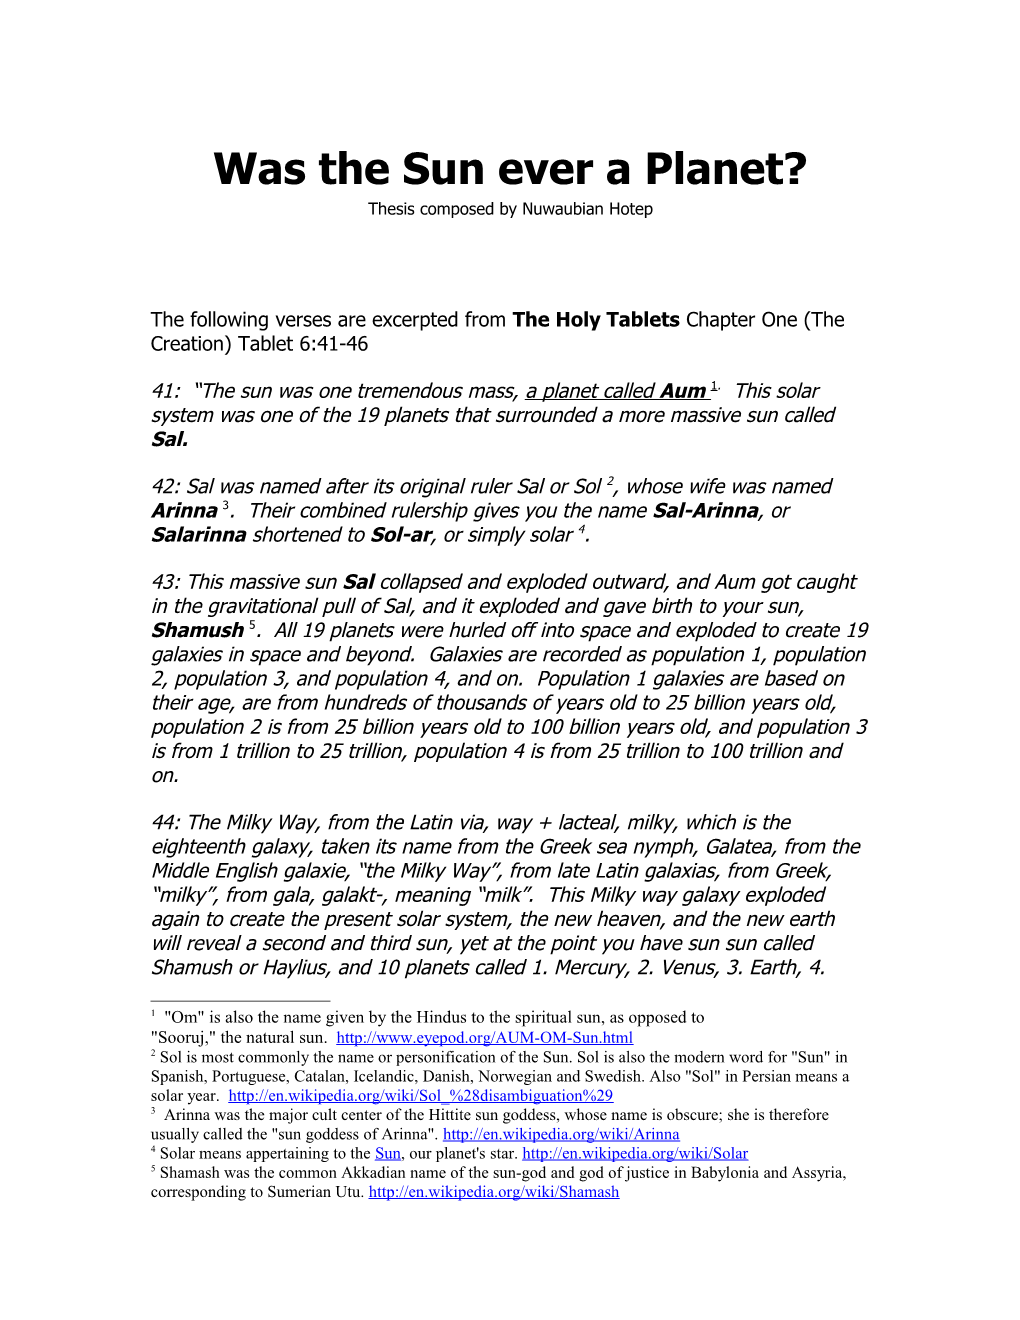 Was the Sun Ever a Planet